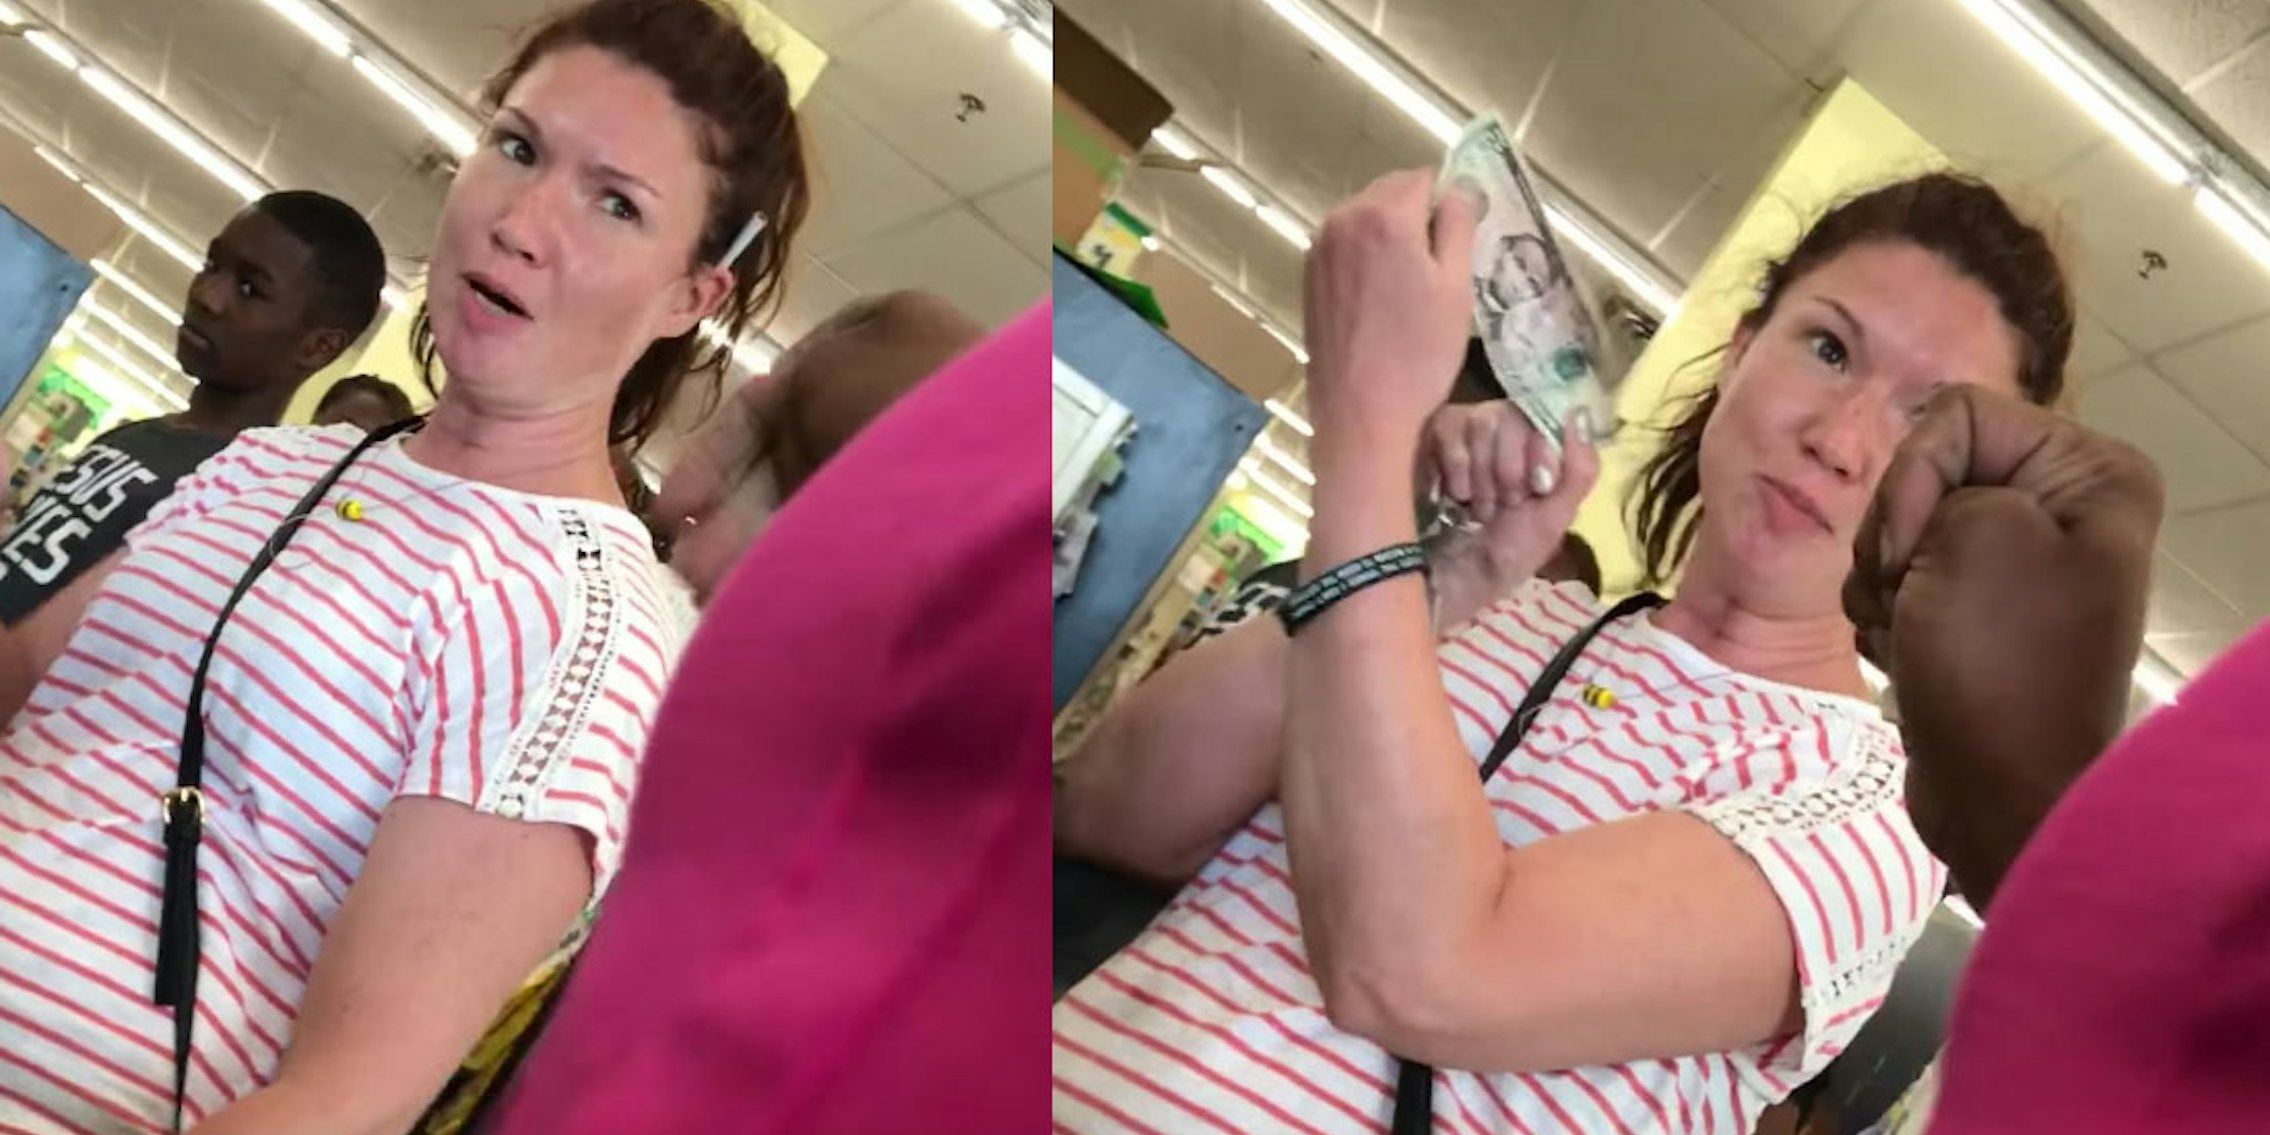 In two photos, a woman at a store in Abington, Pennsylvania, is seen telling a Puerto Rican woman to 'go back' and brandishing a bundle of dollar notes telling her it's 'legal' money